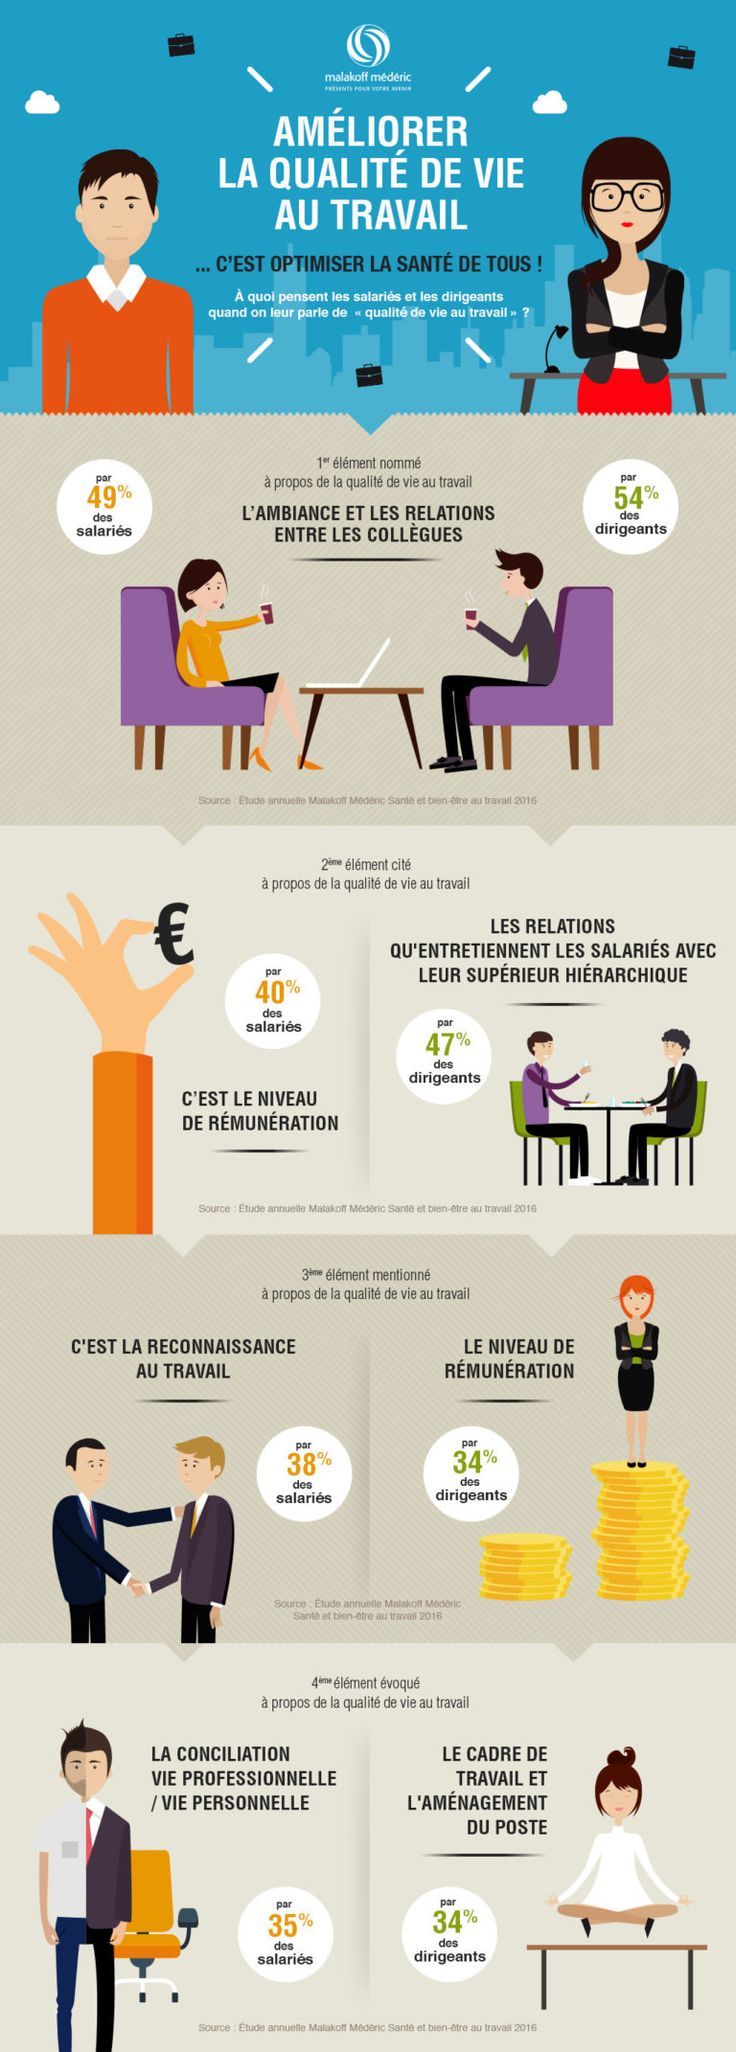 1572165213_783_Psychology-Infographic-Infographie-Malakoff-Mederic-sur-la-qualite-de Psychology Infographic : Infographie Malakoff Mederic sur la qualité de vie au travail